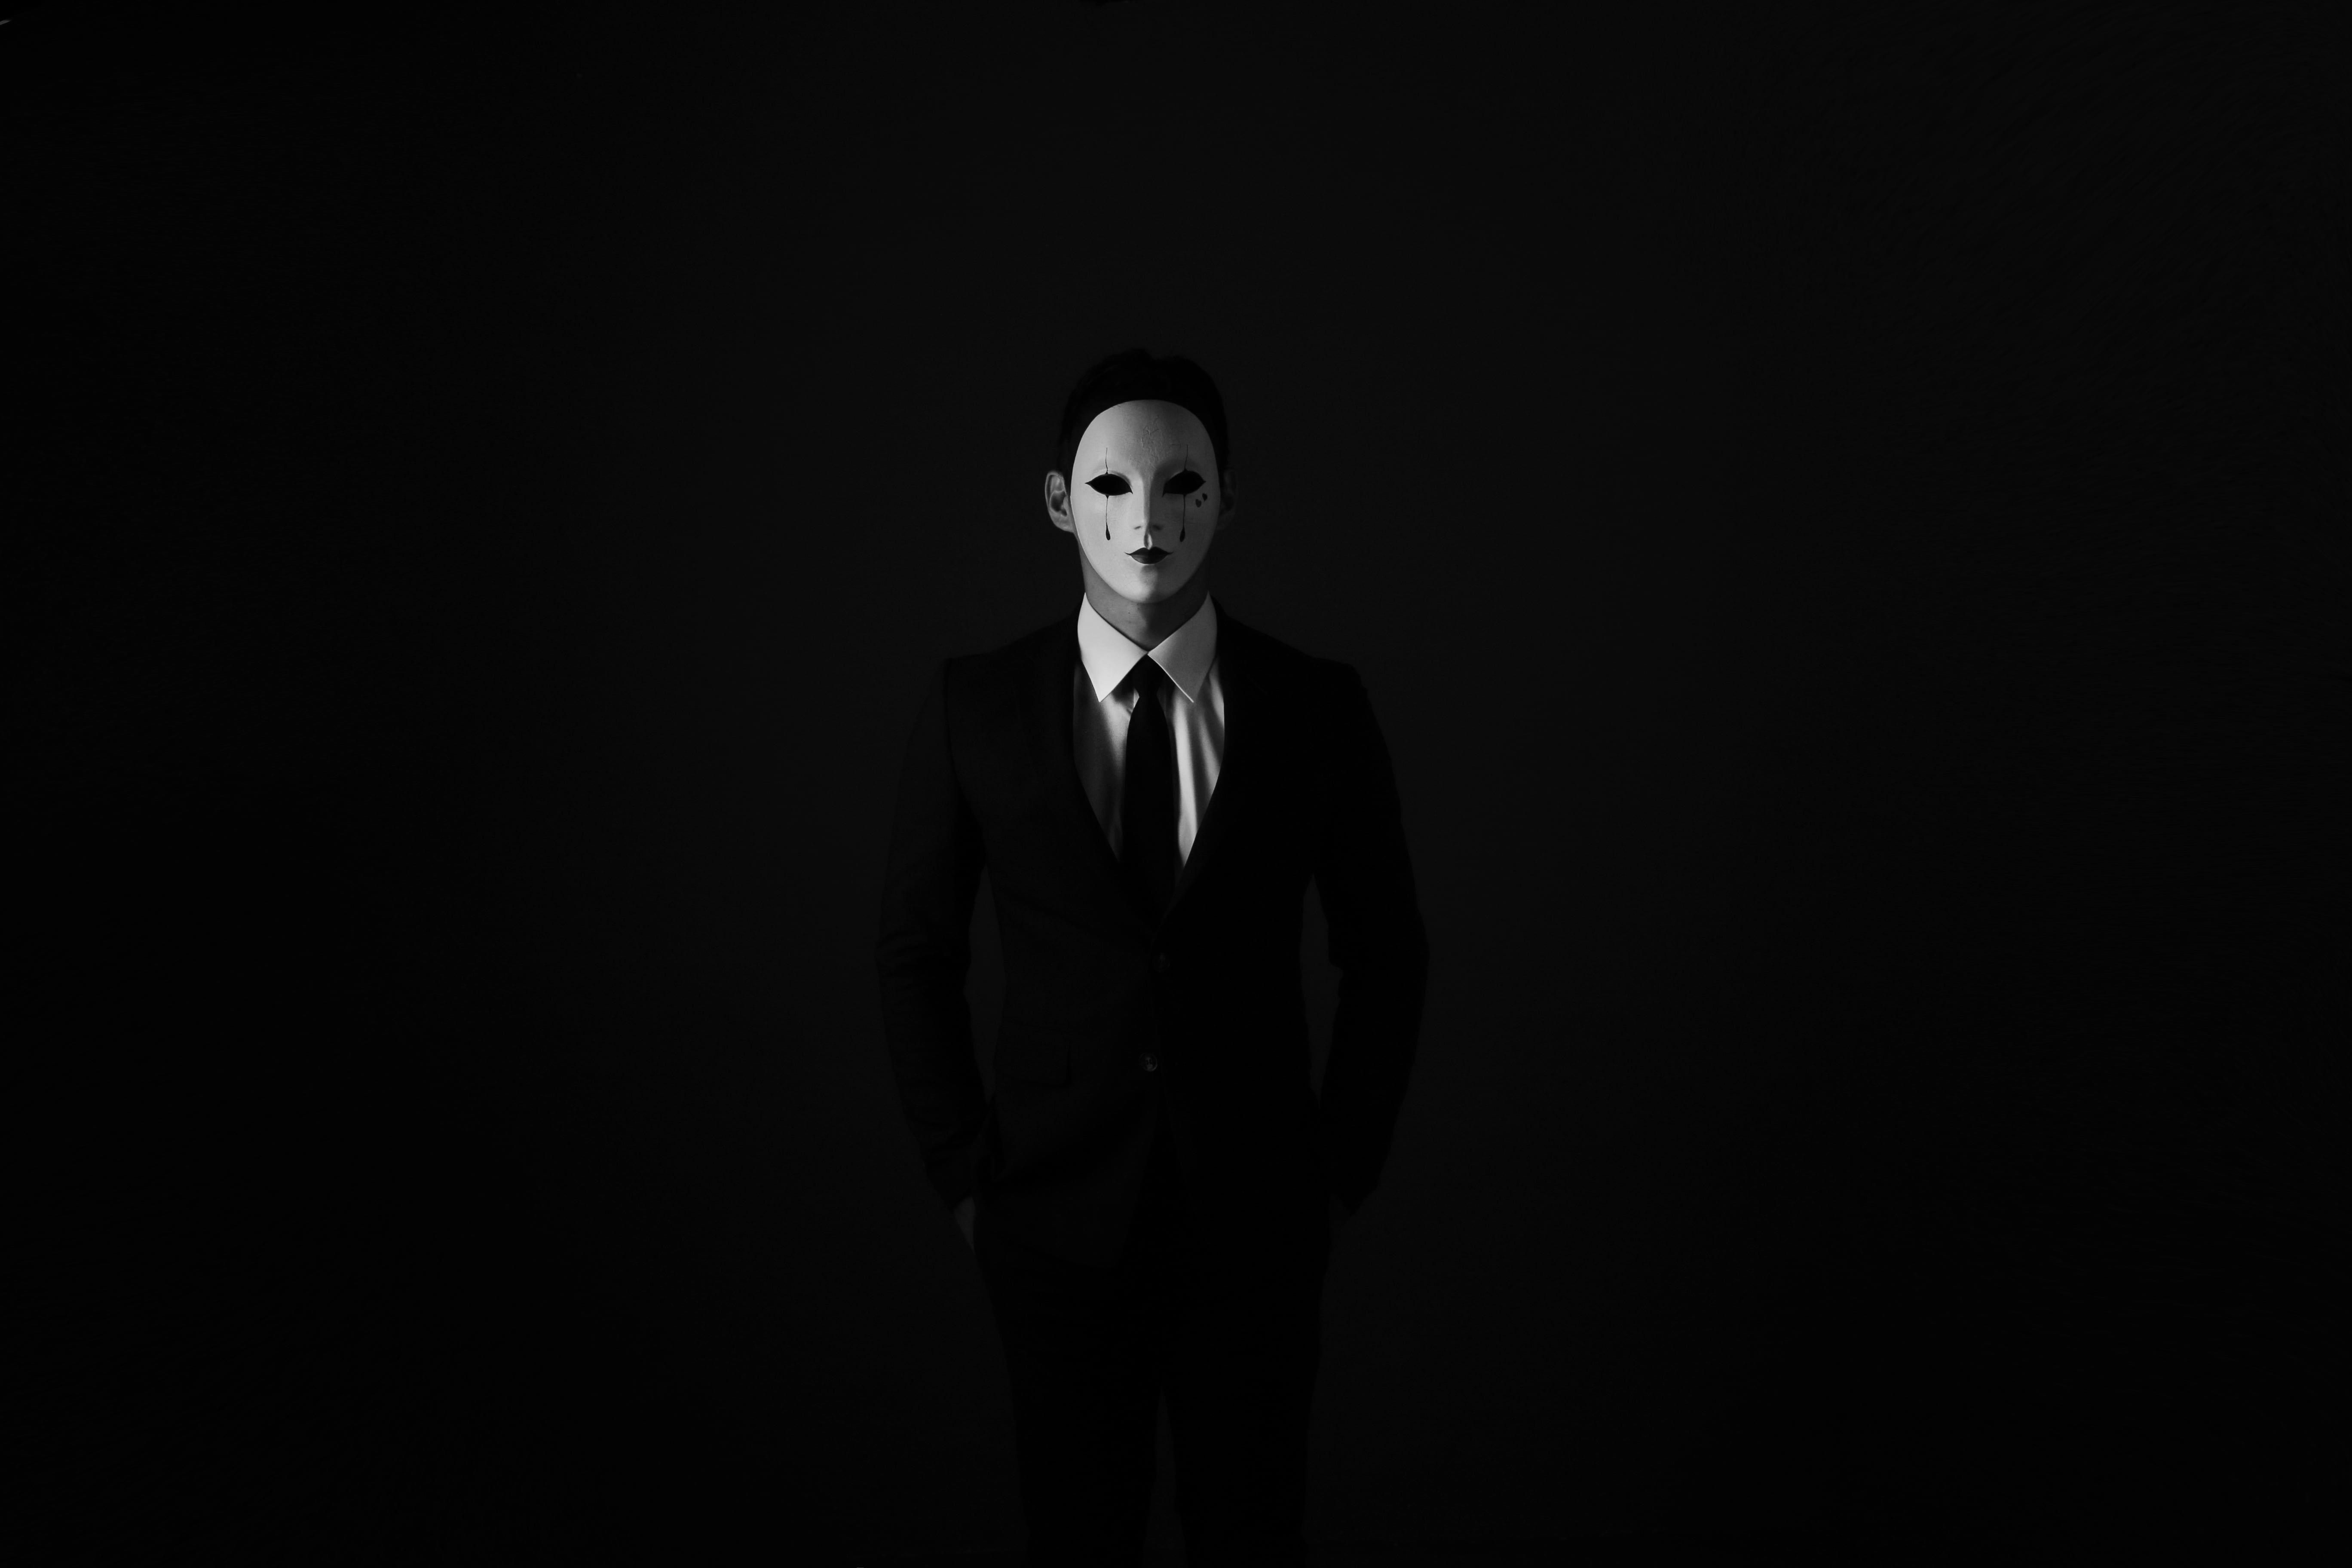 mask, anonymous, bw, tie, suit jacket, shirt, one person, front view